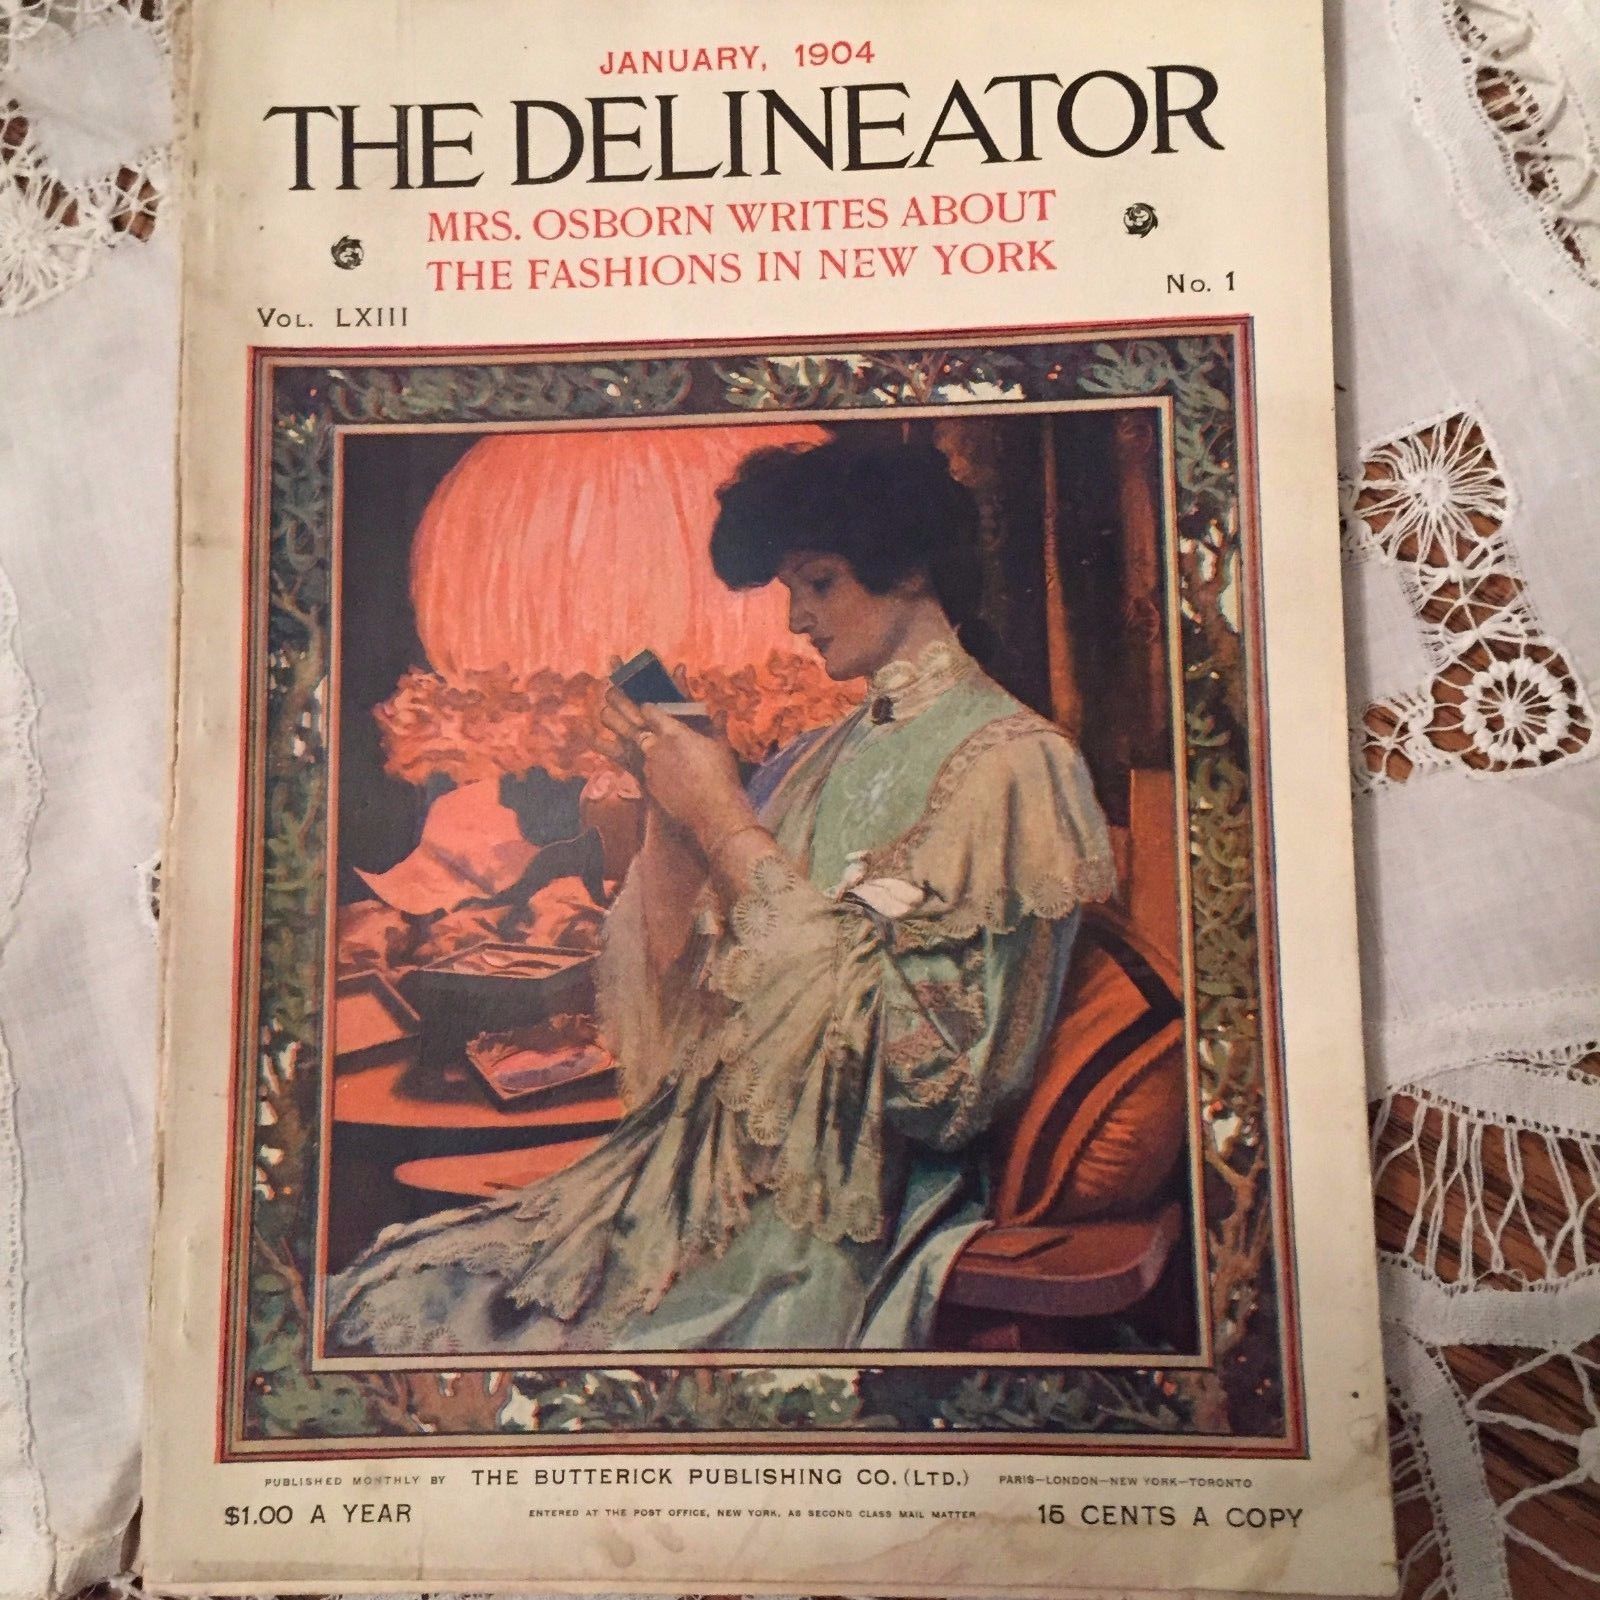 Lovely place to research: January, 1904 Delineator magazine